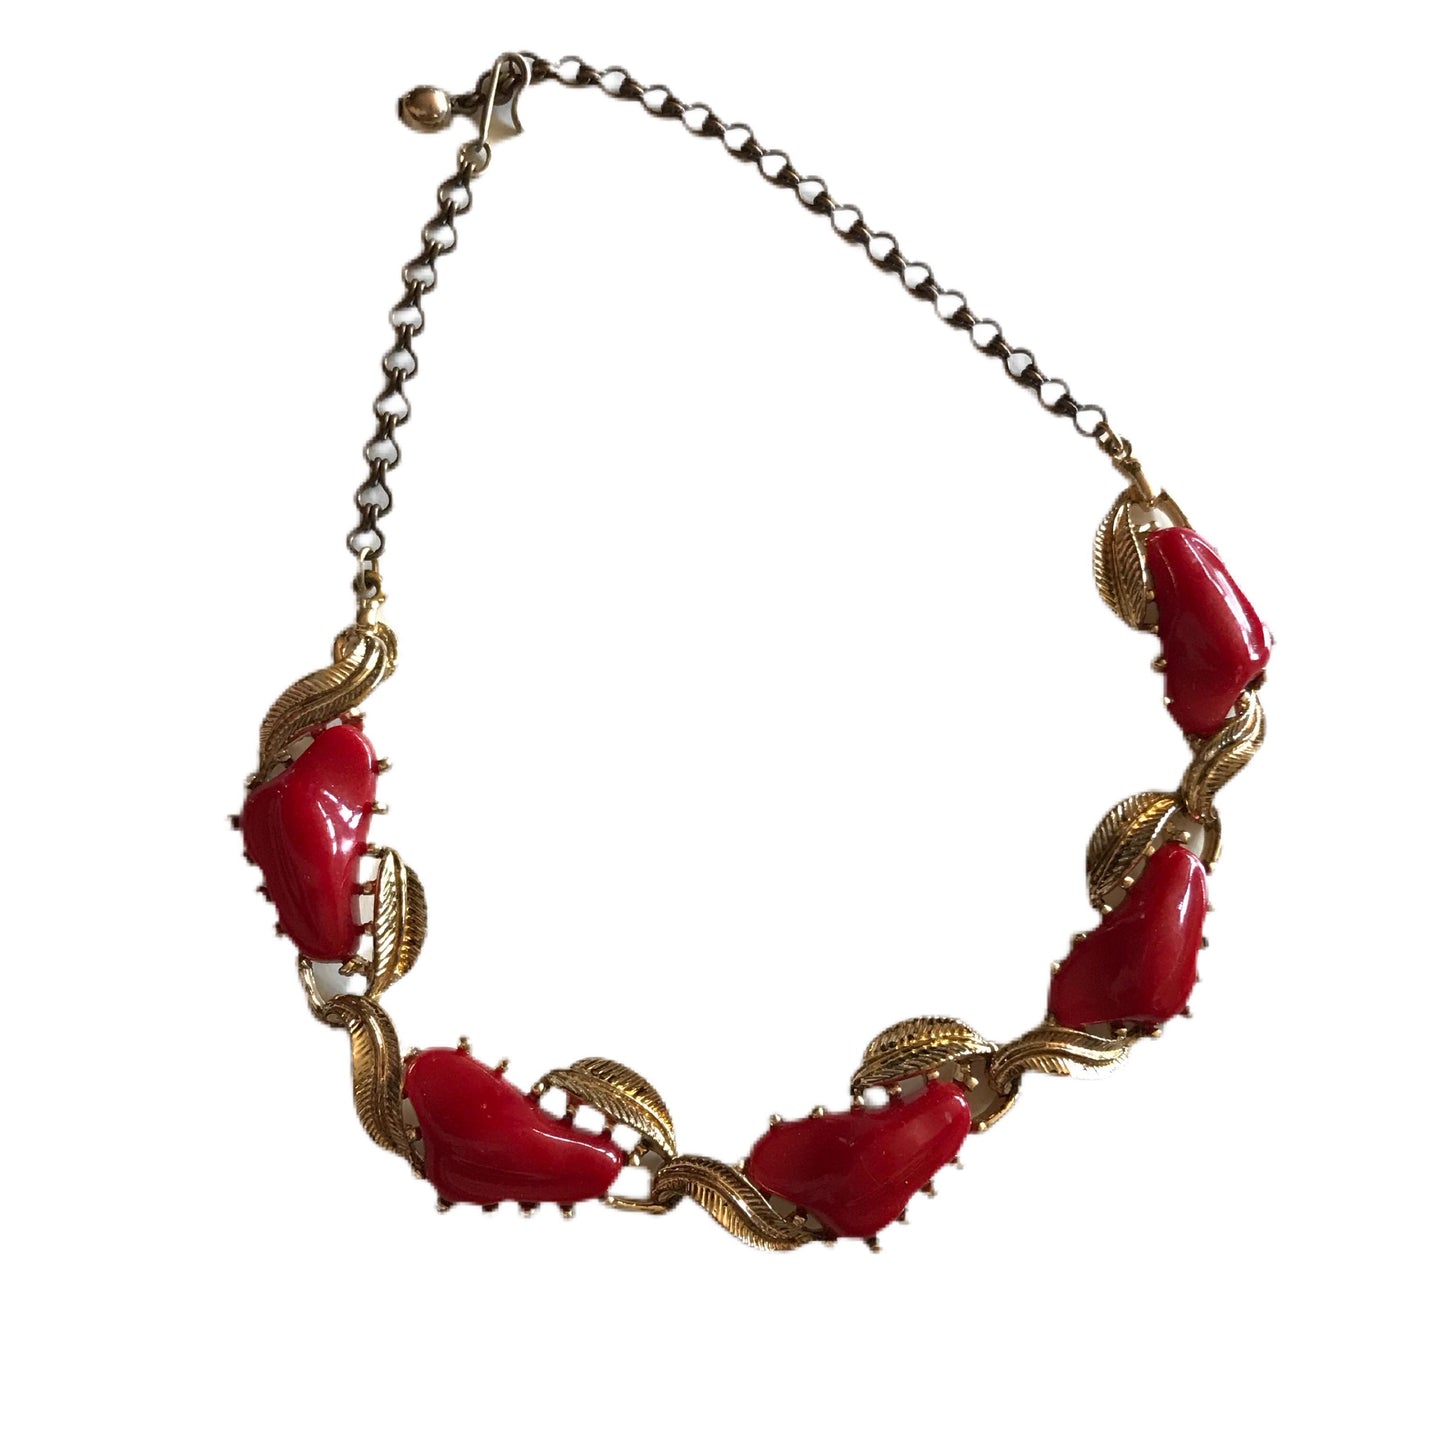 Thermoset Red Plastic and Gold Tone Leaves Necklace circa 1960s